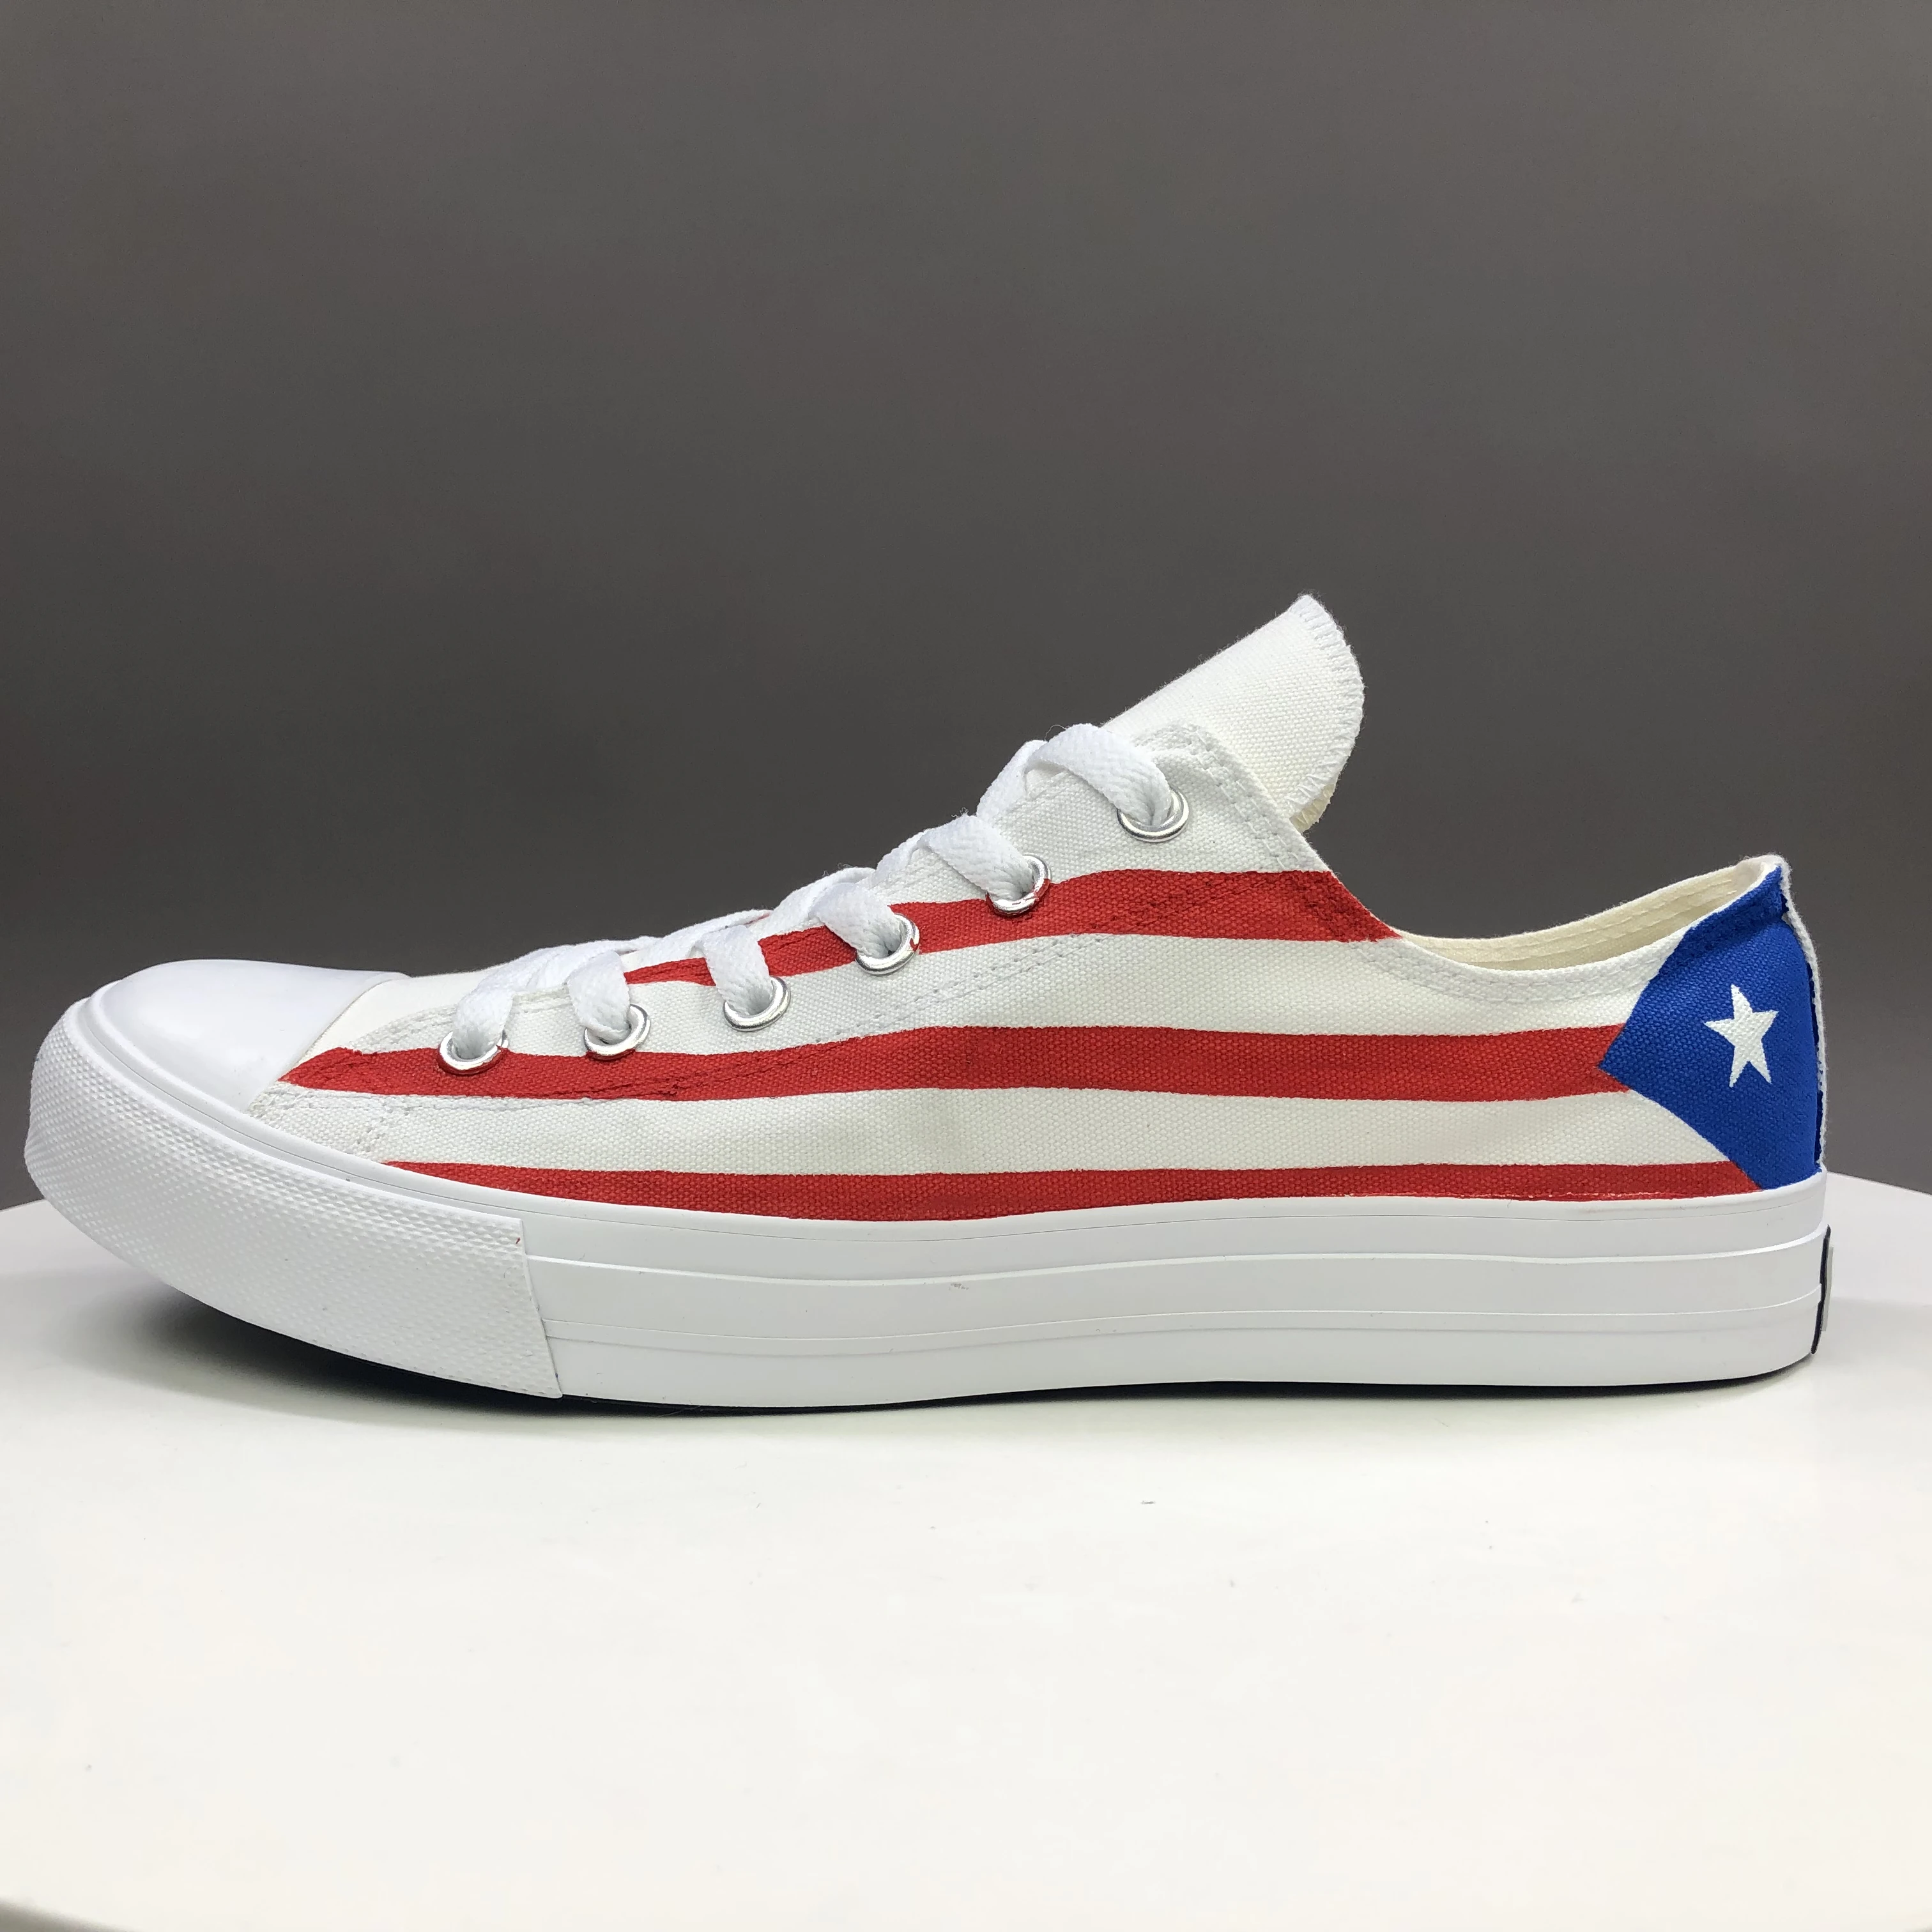 

Wen Hand Painted Flag Canvas Shoes Design Puerto Rico Low Top Shallow Mouth Plimsolls Flat Heel Lacing Sneakers Trainers Neutral